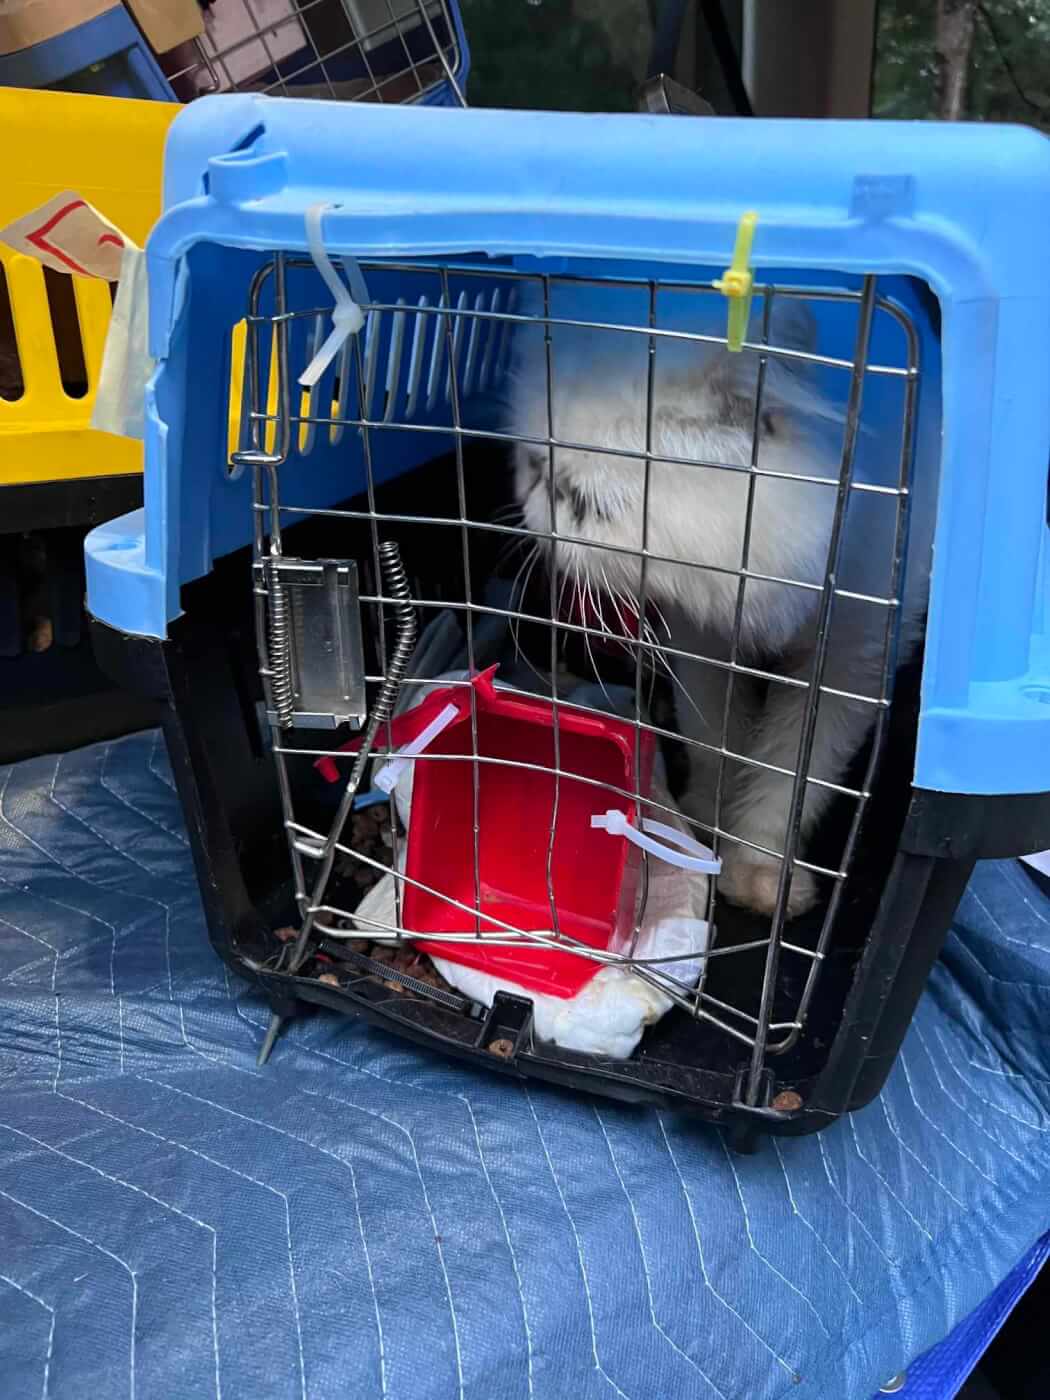 Broken blue crate with a white cat inside